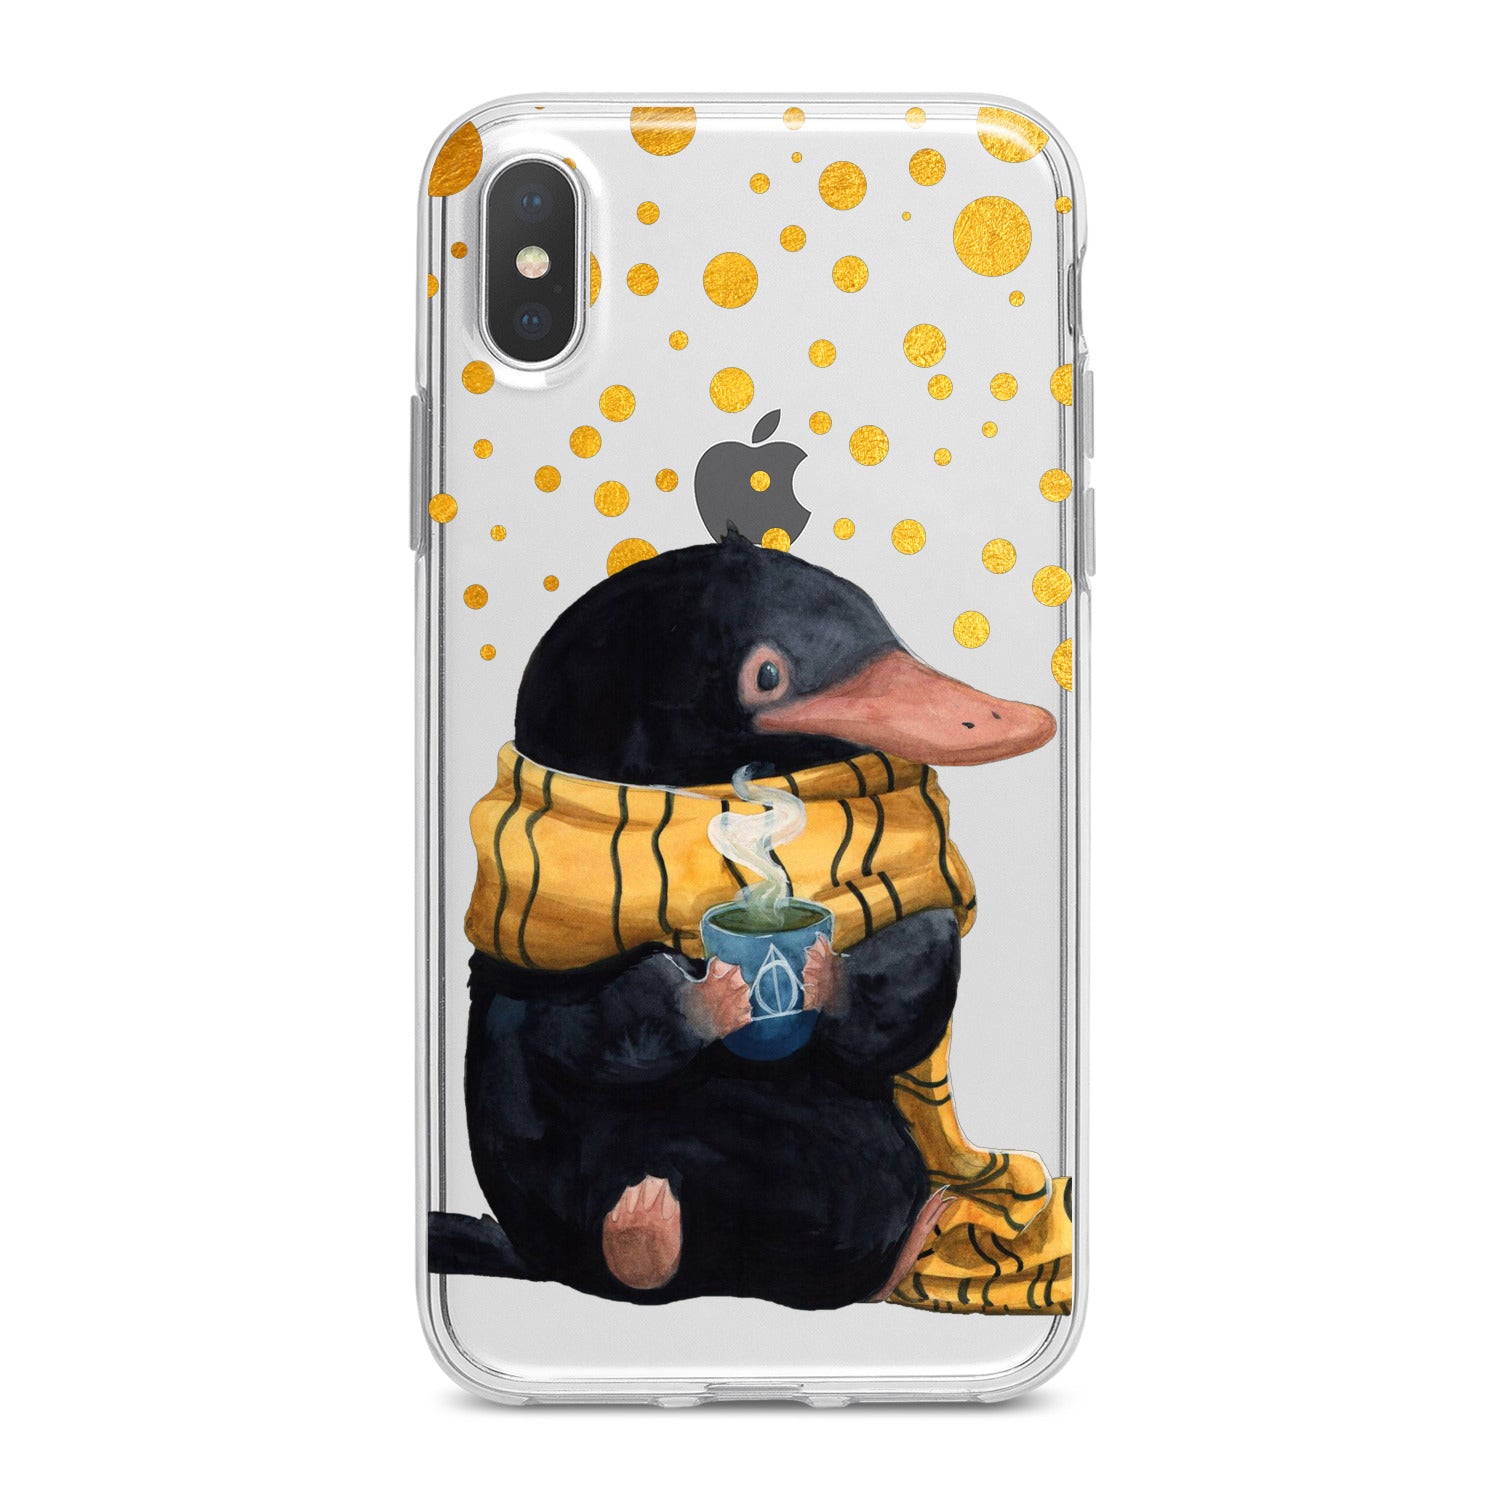 Lex Altern Cute Duck Phone Case for your iPhone & Android phone.